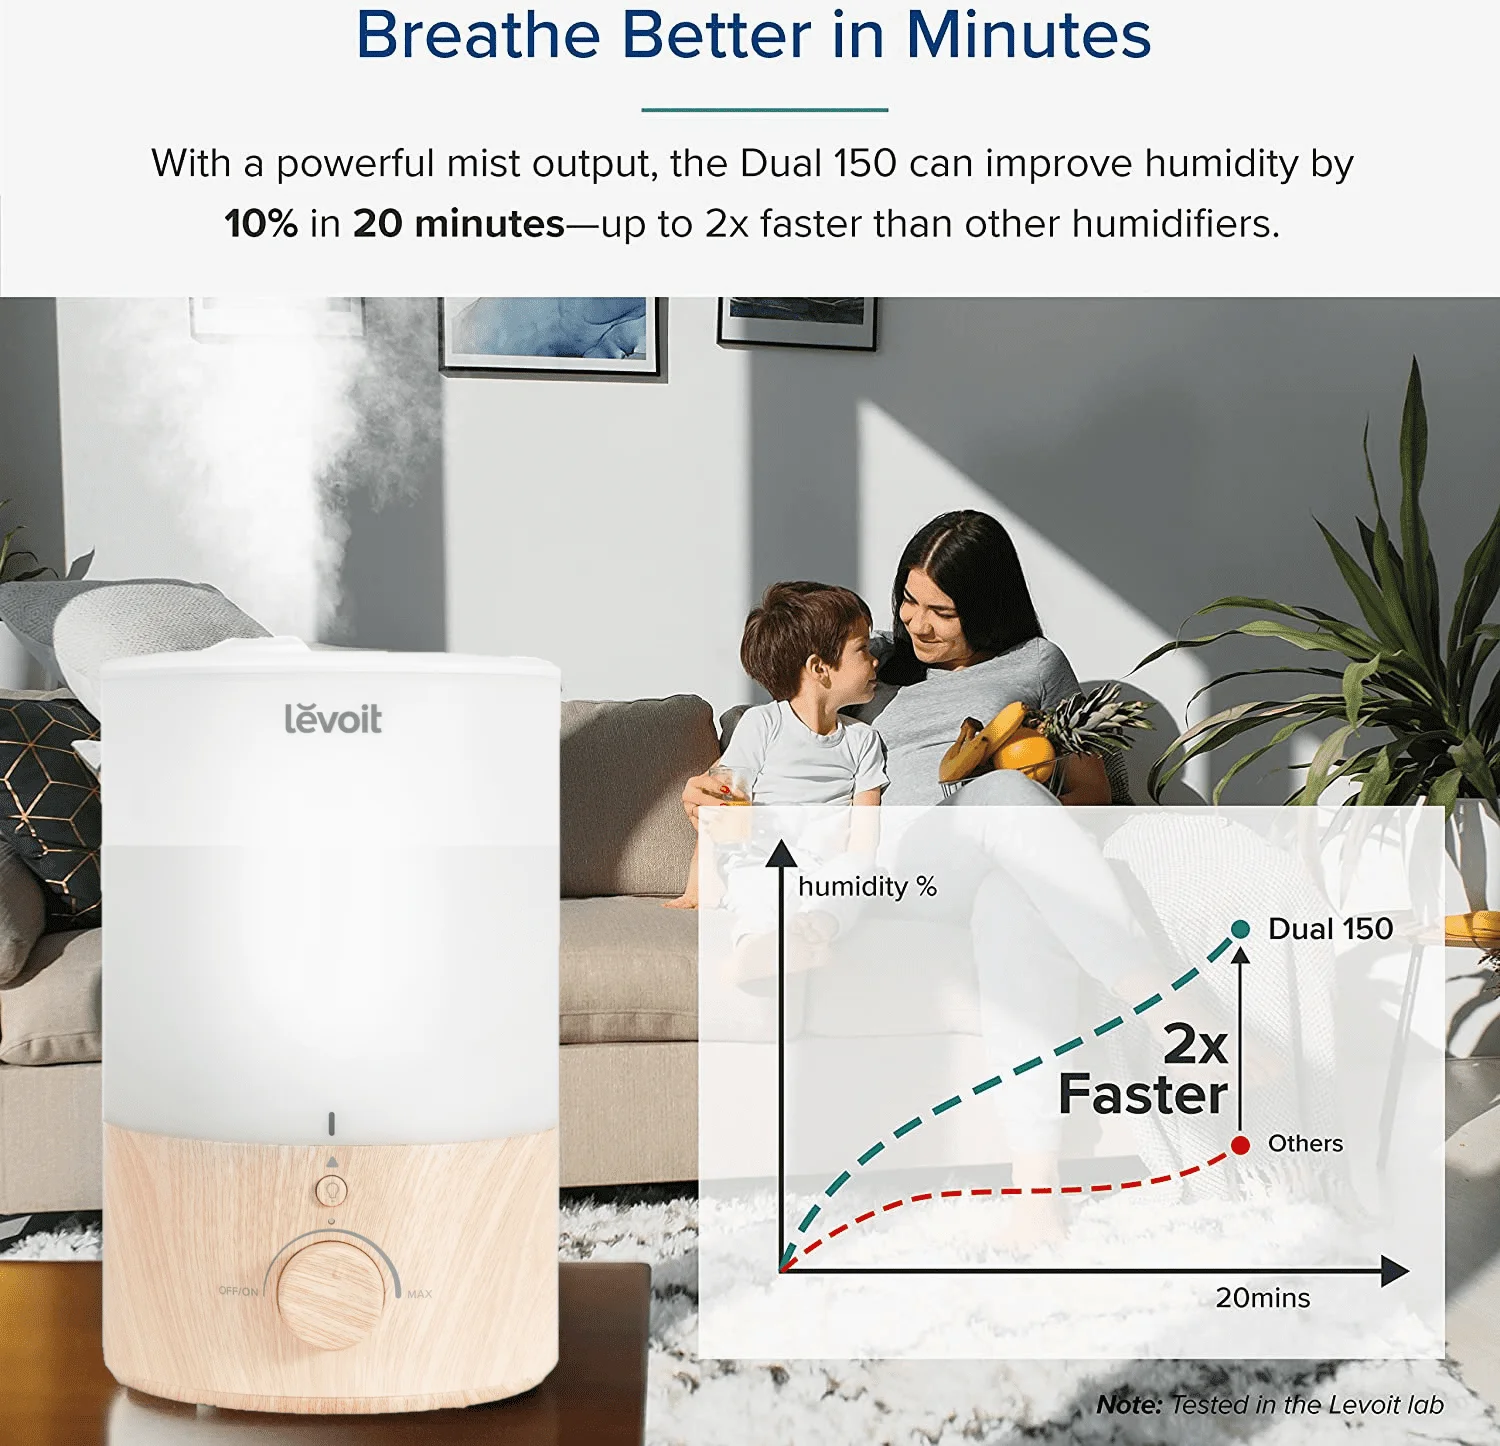 https://ae01.alicdn.com/kf/S5c131a0b12644af1a9d6eb91baac9e62m/Levoit-Cool-Mist-Humidifier-for-Room-3L-Top-Fill-humidifier-for-Large-Rooms-Bedrooms-Baby-With.jpg